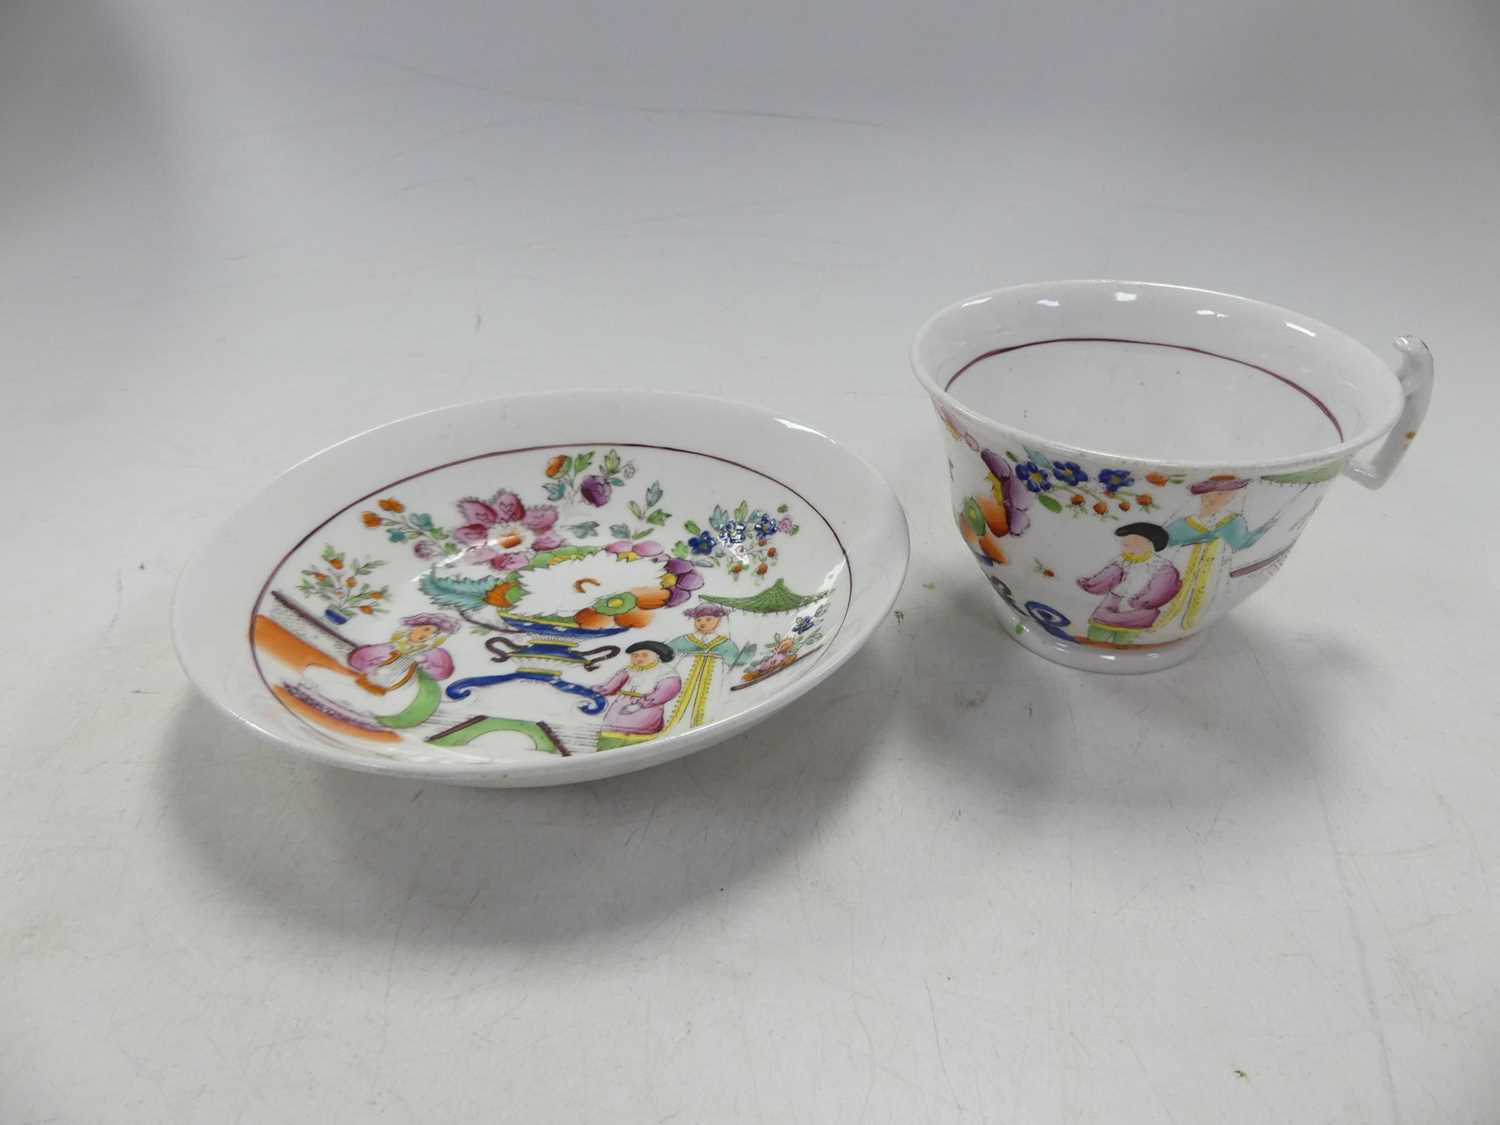 A collection of Asian ceramics, to include blue and white porcelain tea bowls Large bowl is - Image 5 of 9